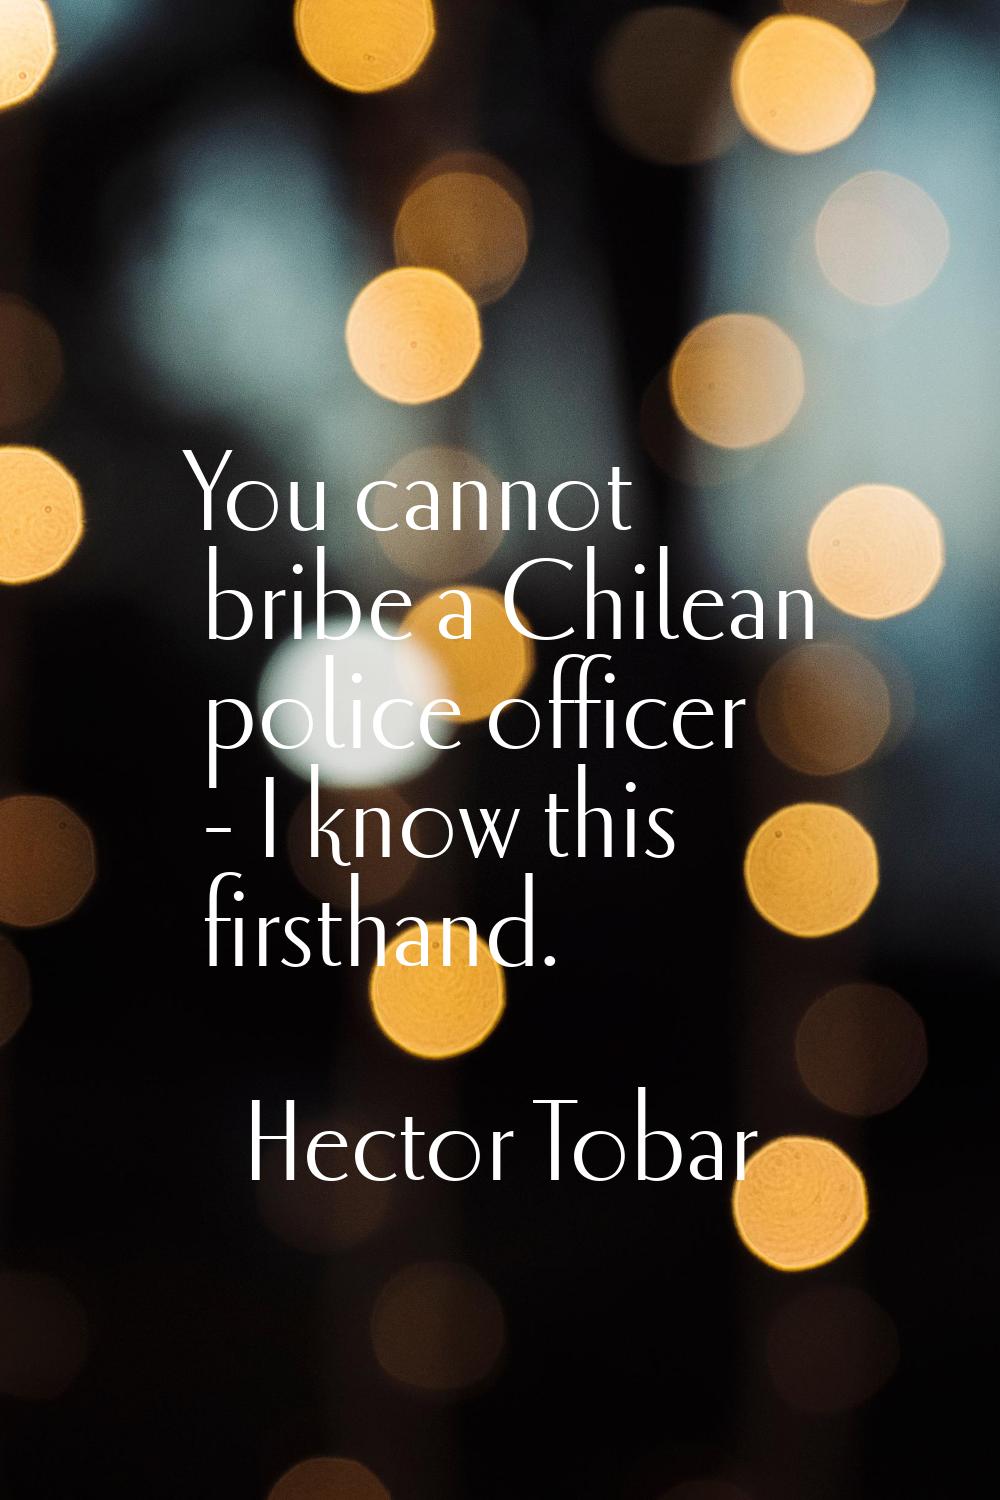 You cannot bribe a Chilean police officer - I know this firsthand.